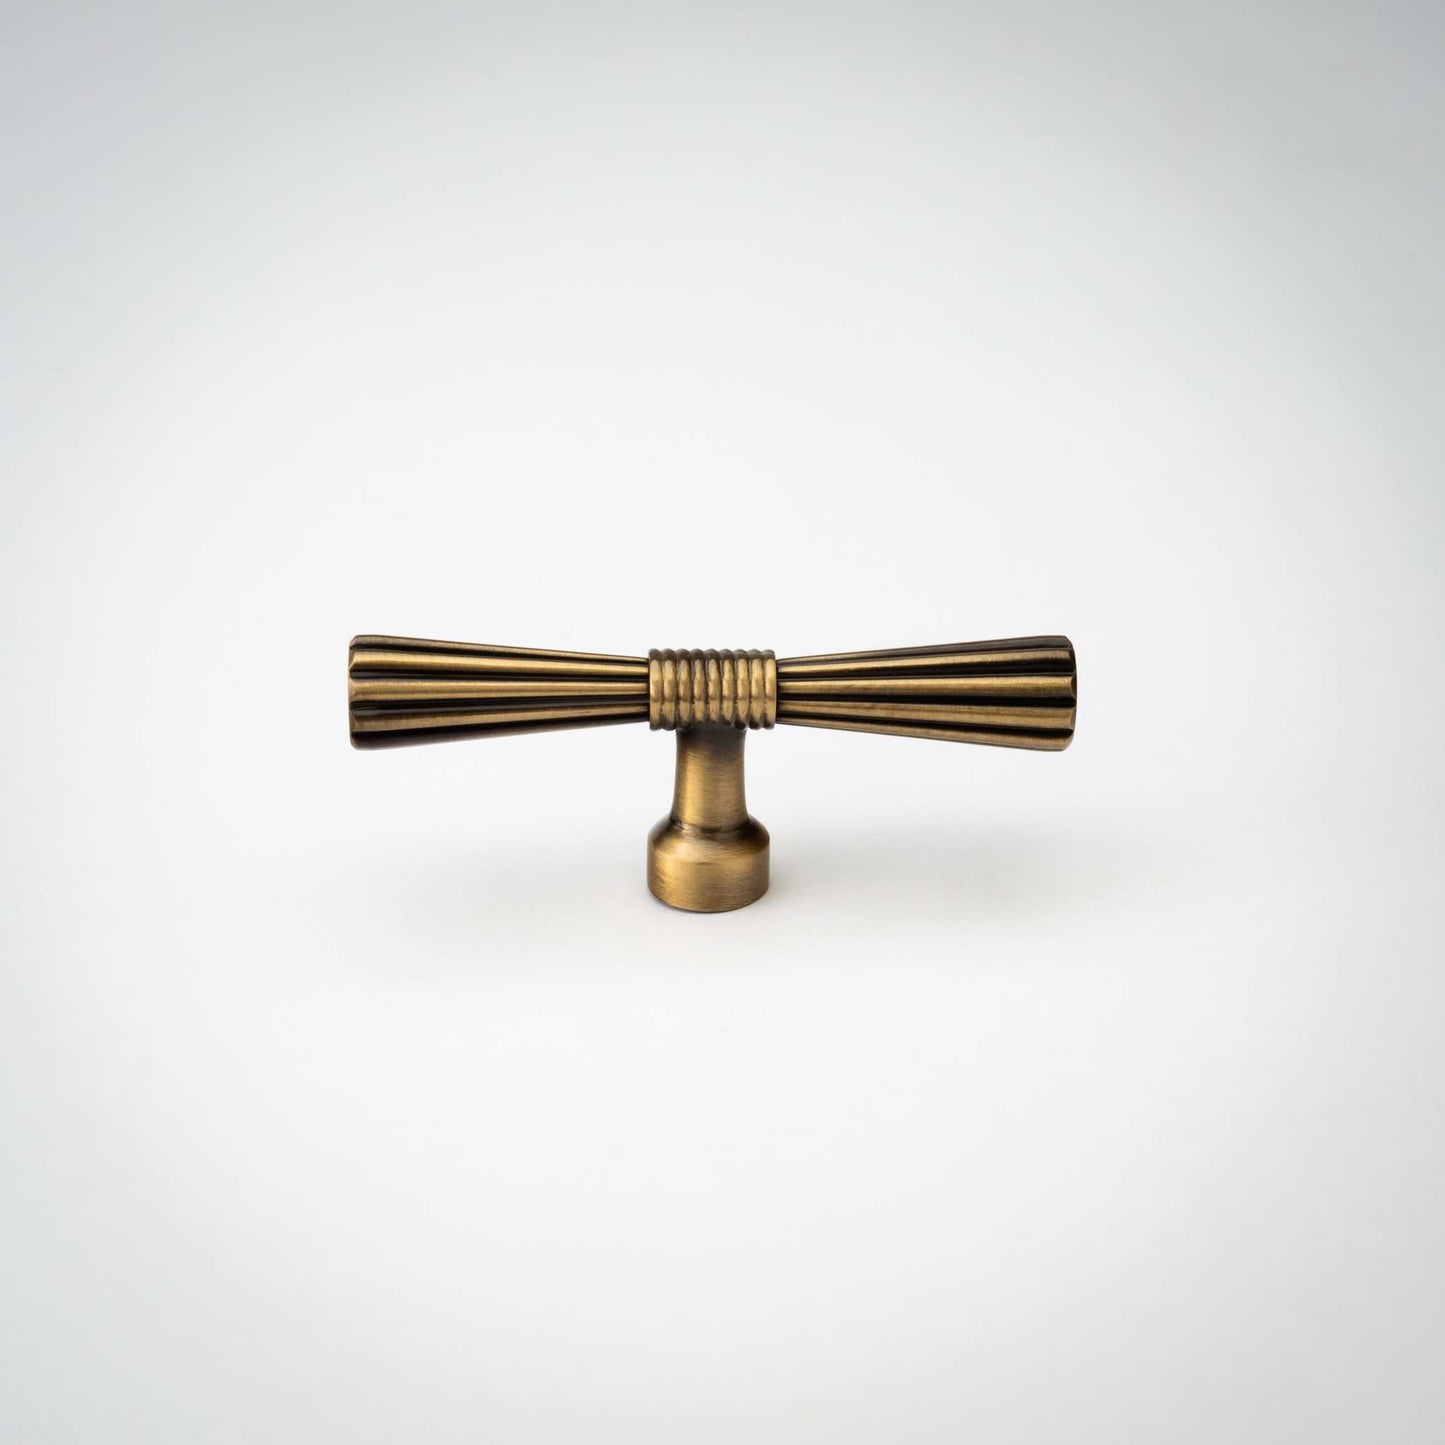 Beau, Antique Brass Cabinet Knob Simple elegance in a minimalist yet modern design, Beau elevates a space with both visual and tactile textures that draws attention without distracting from the sKnobBeau, Antique Brass Knob